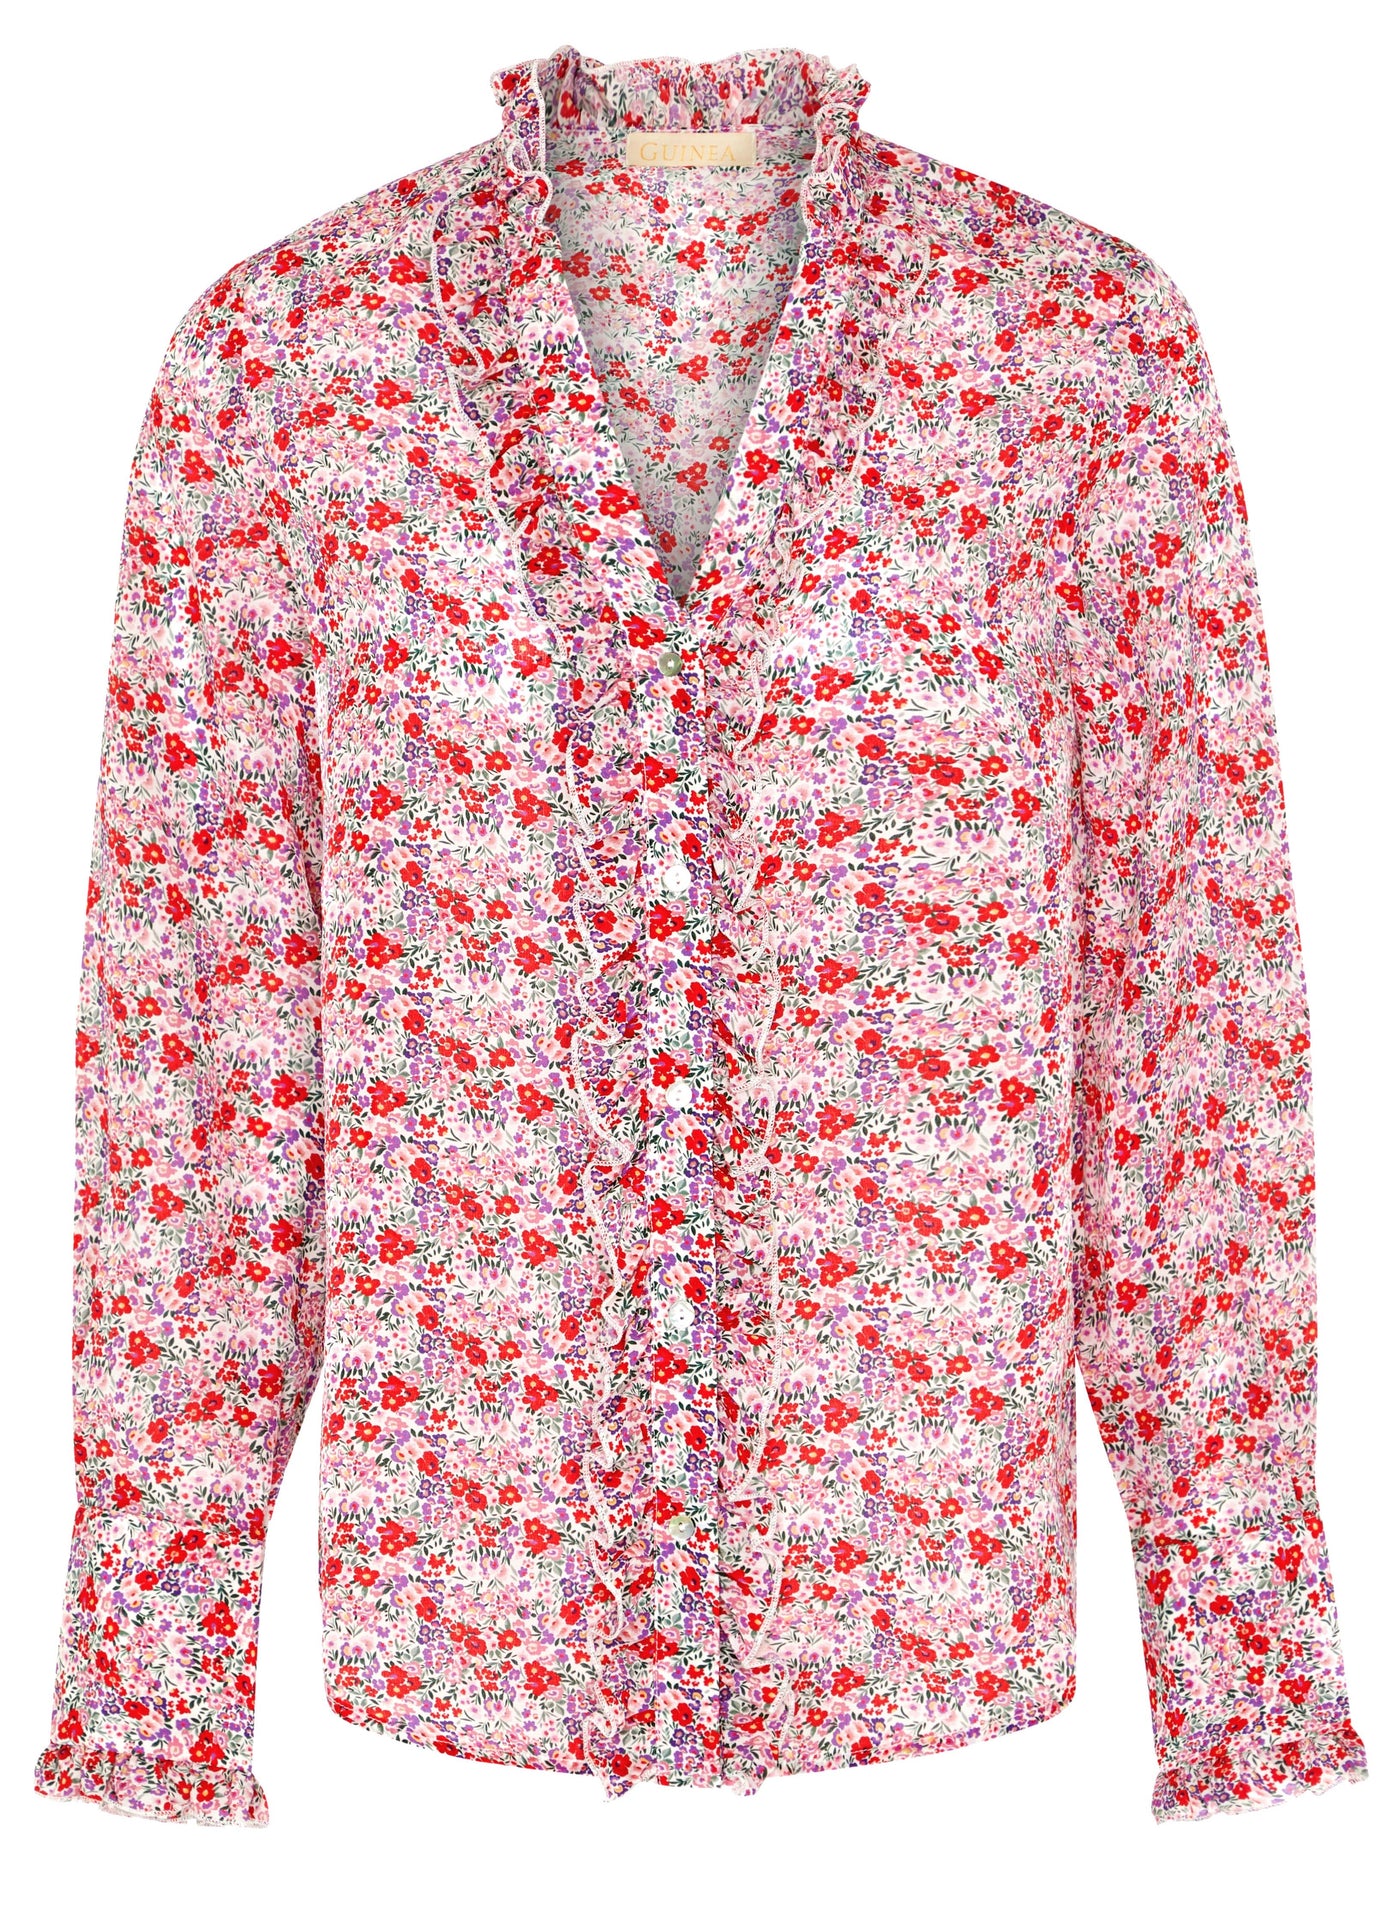 Women's floral print silk shirt in red, pink and purple